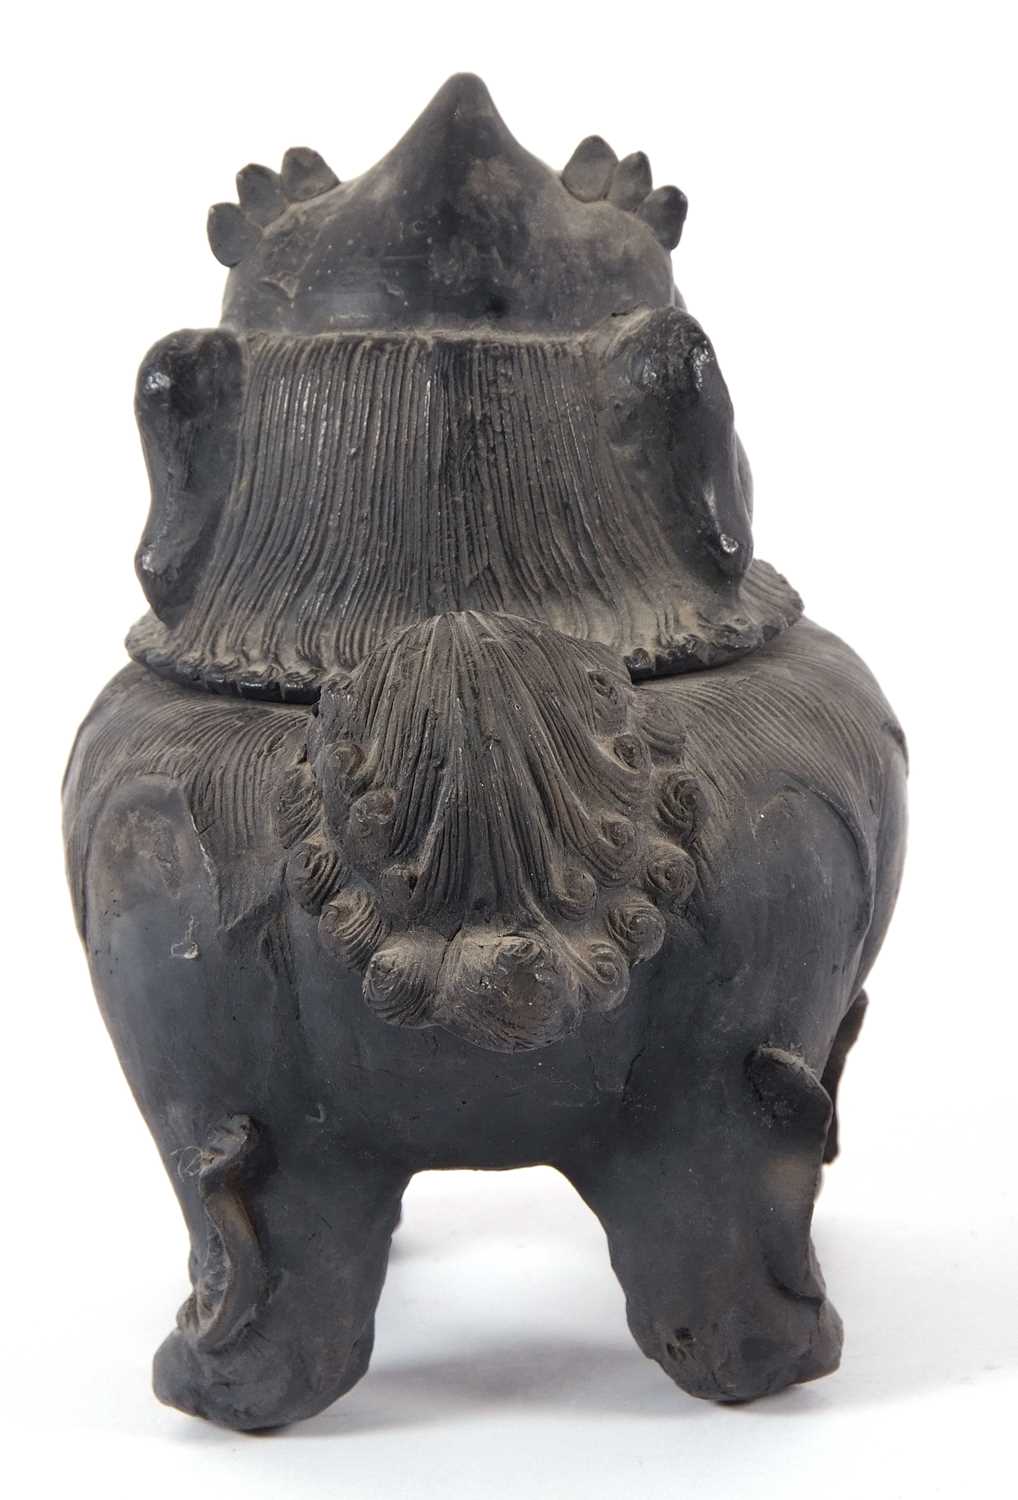 An unusual bronzed effect incense burner decorated as a mythical beast, in a ceramic body rather - Image 6 of 6